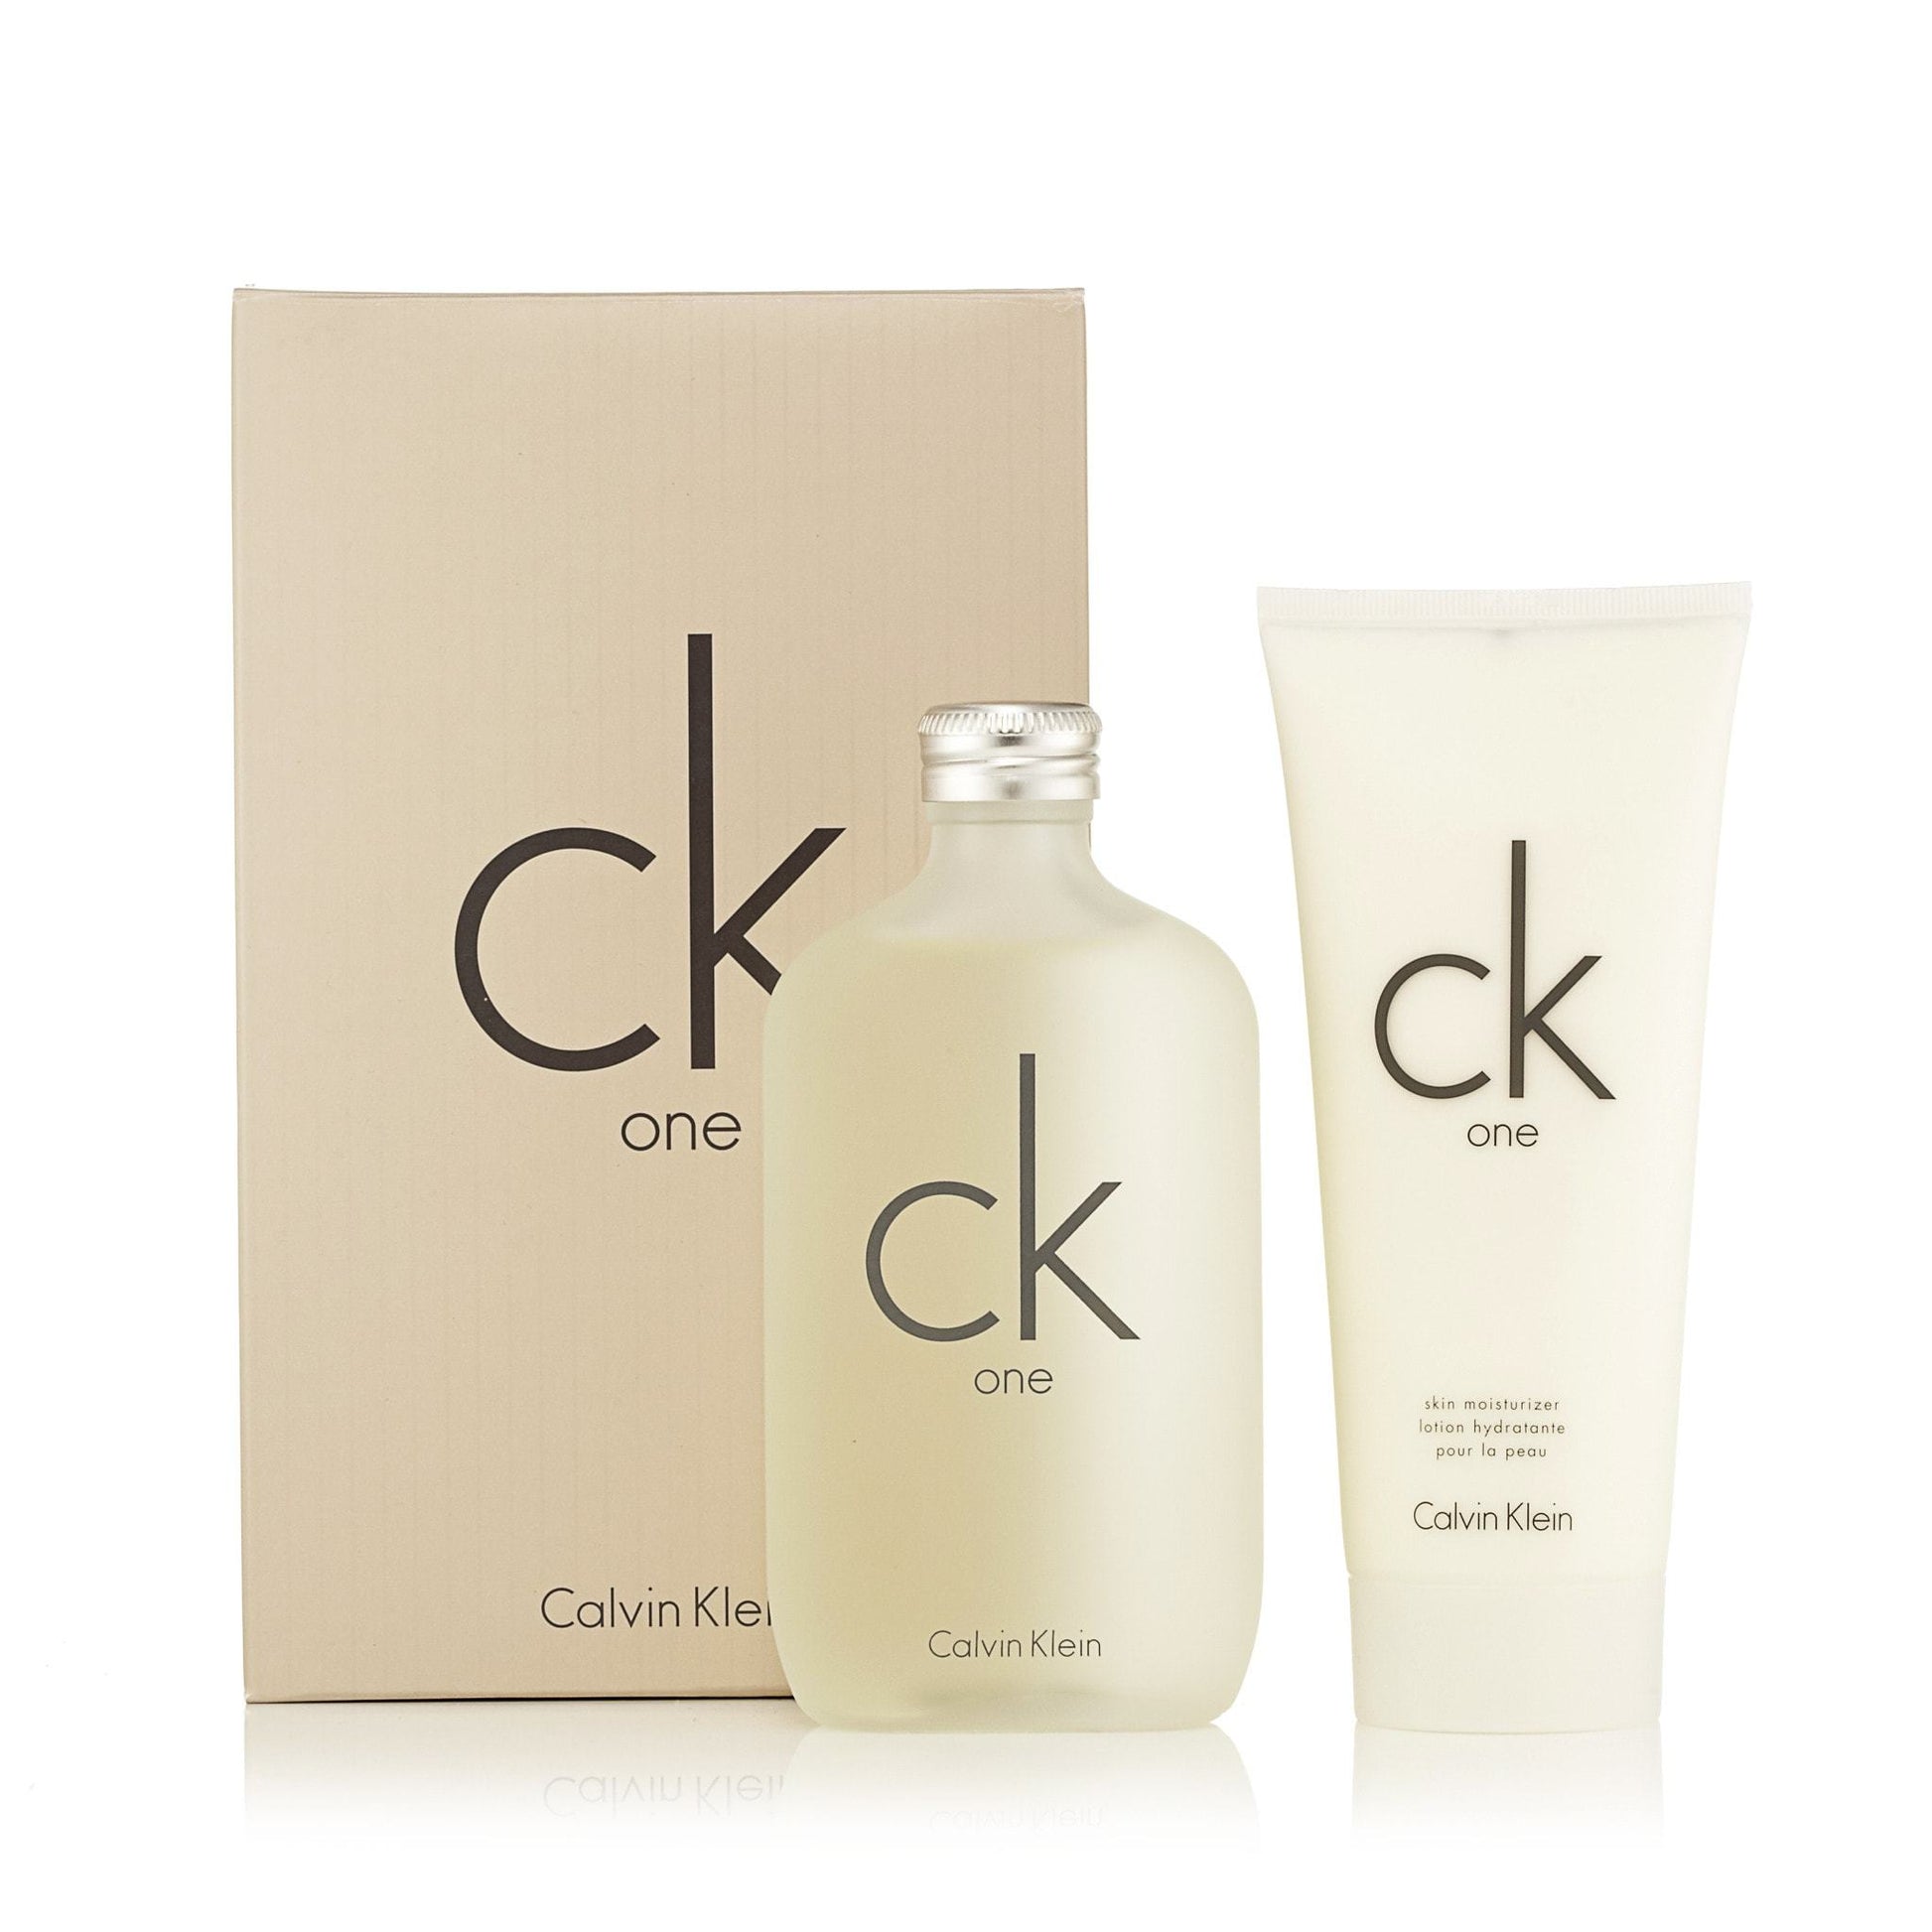 CK One by Men and Moisturizer and Gift Women – Outlet Calvin K Skin for EDT Fragrance Set